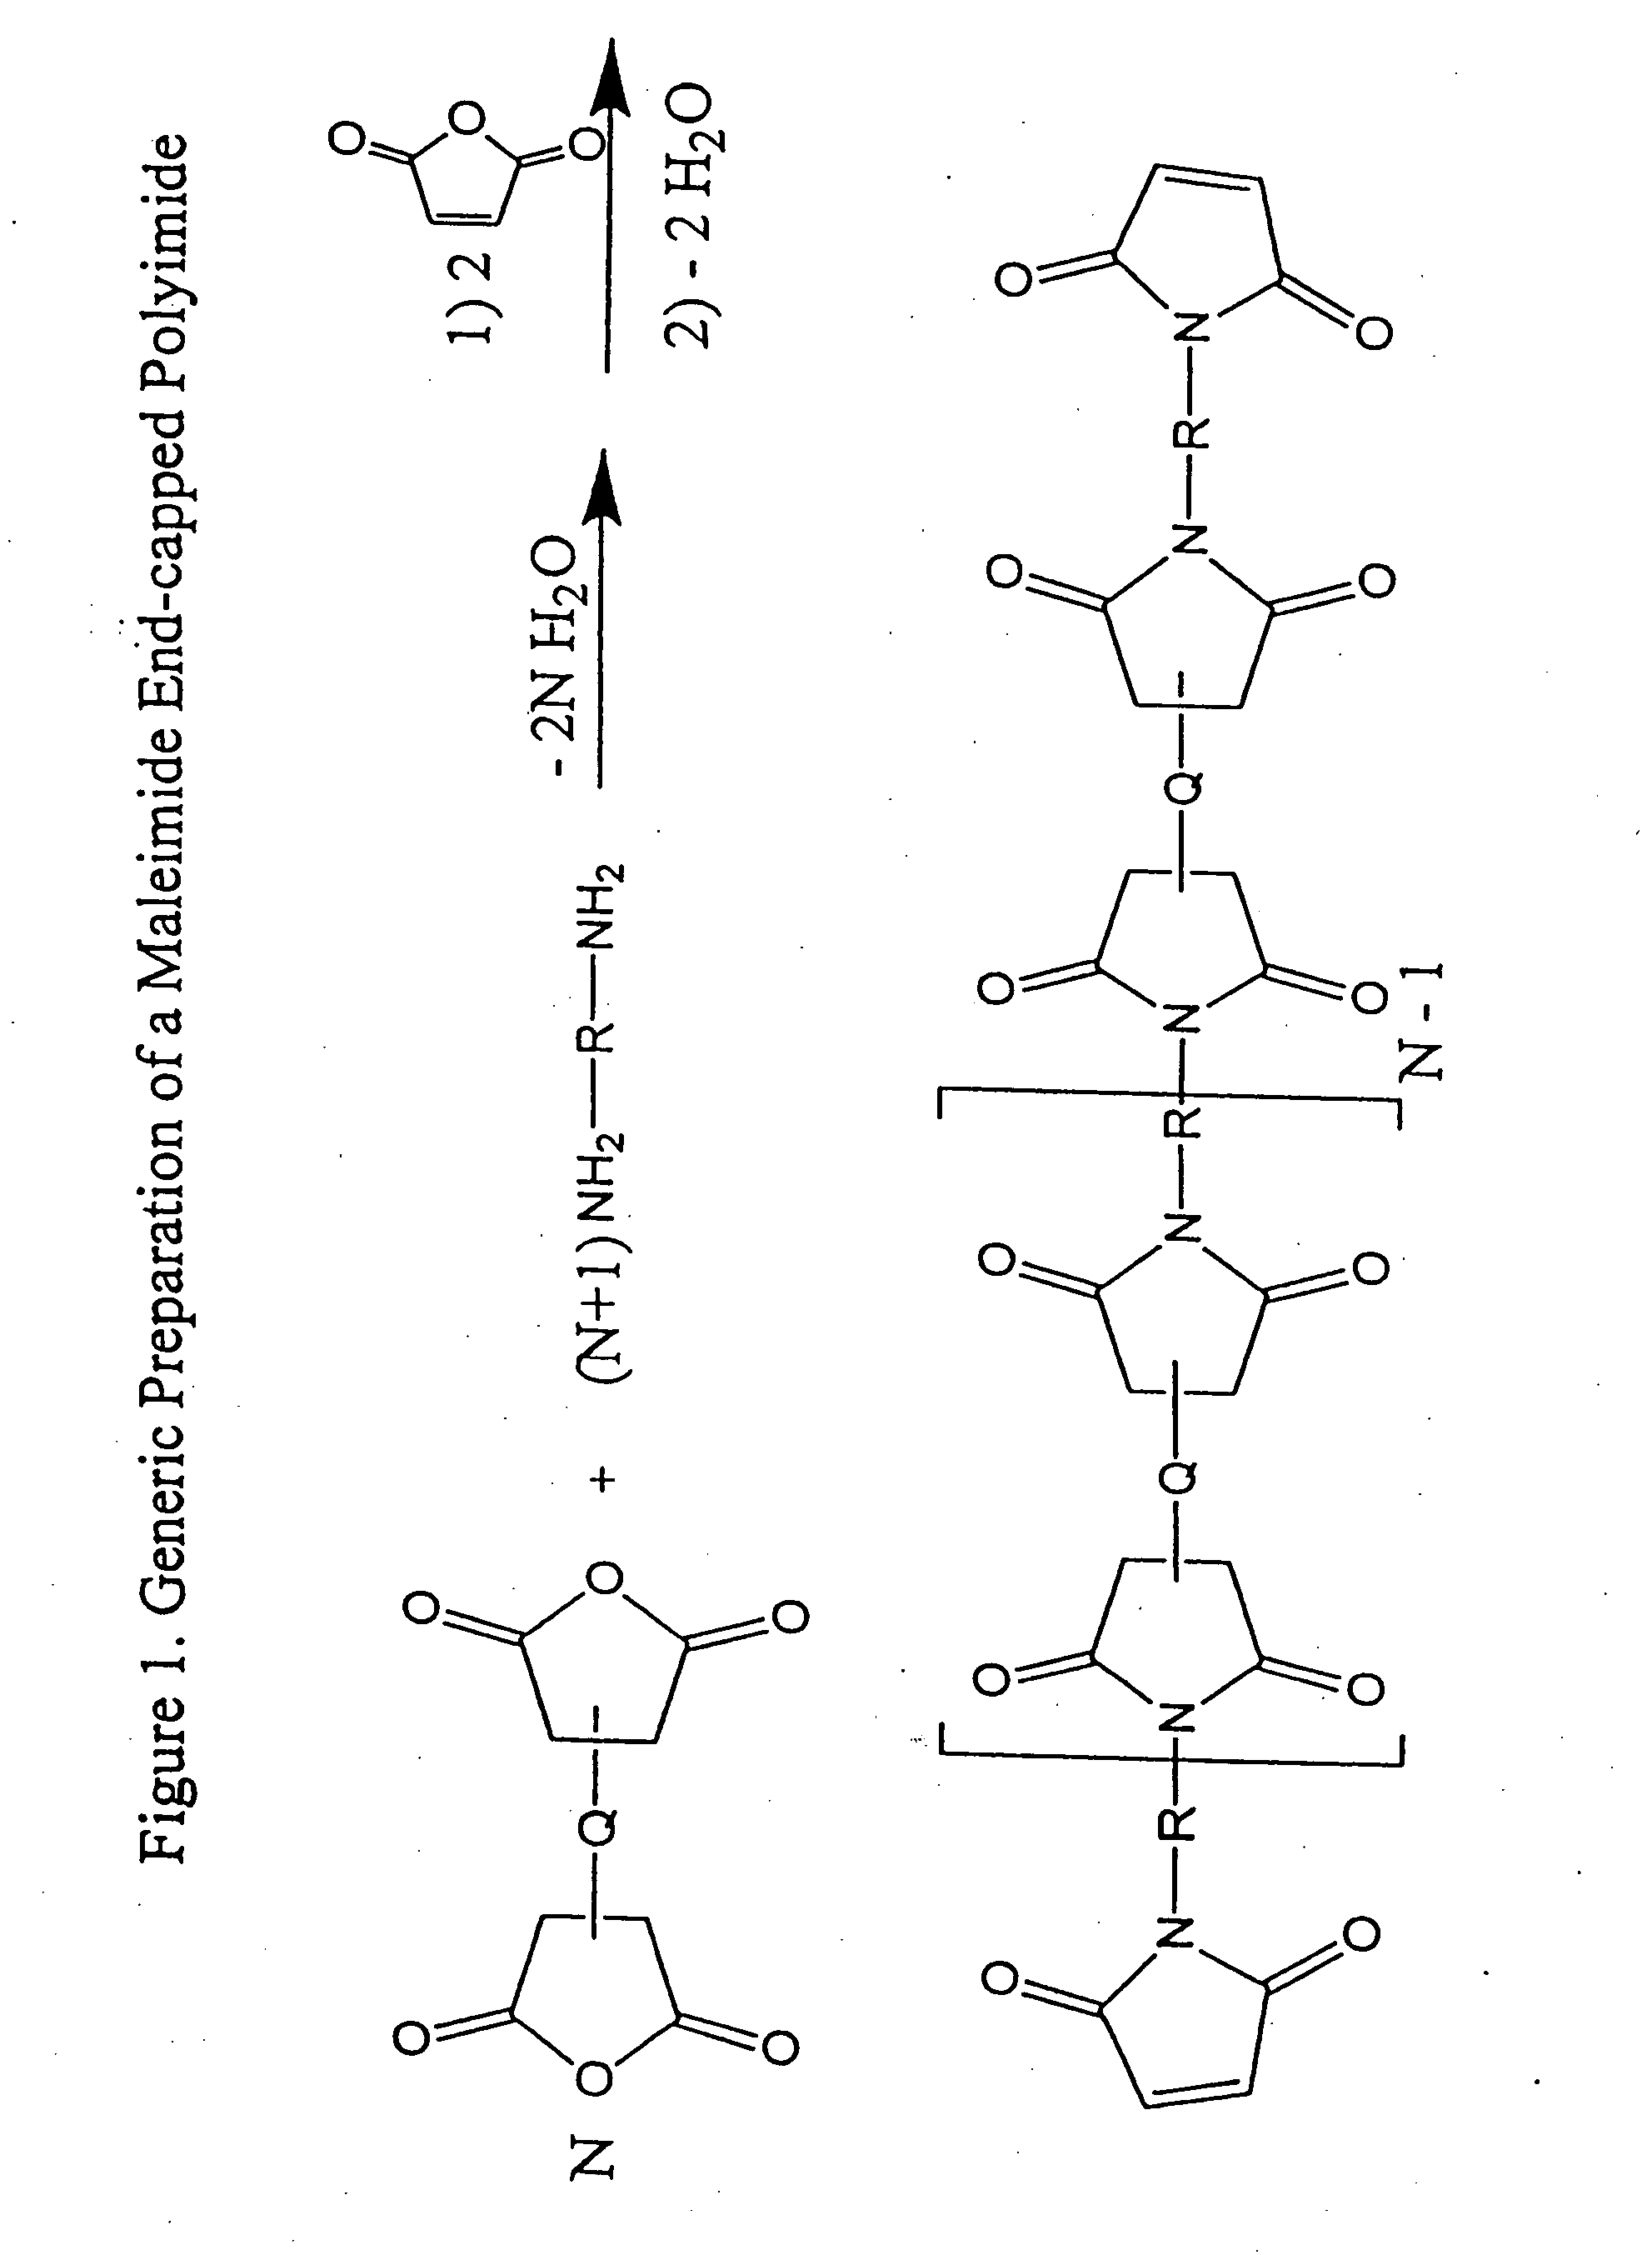 Imide-linked maleimide and polymaleimide compounds